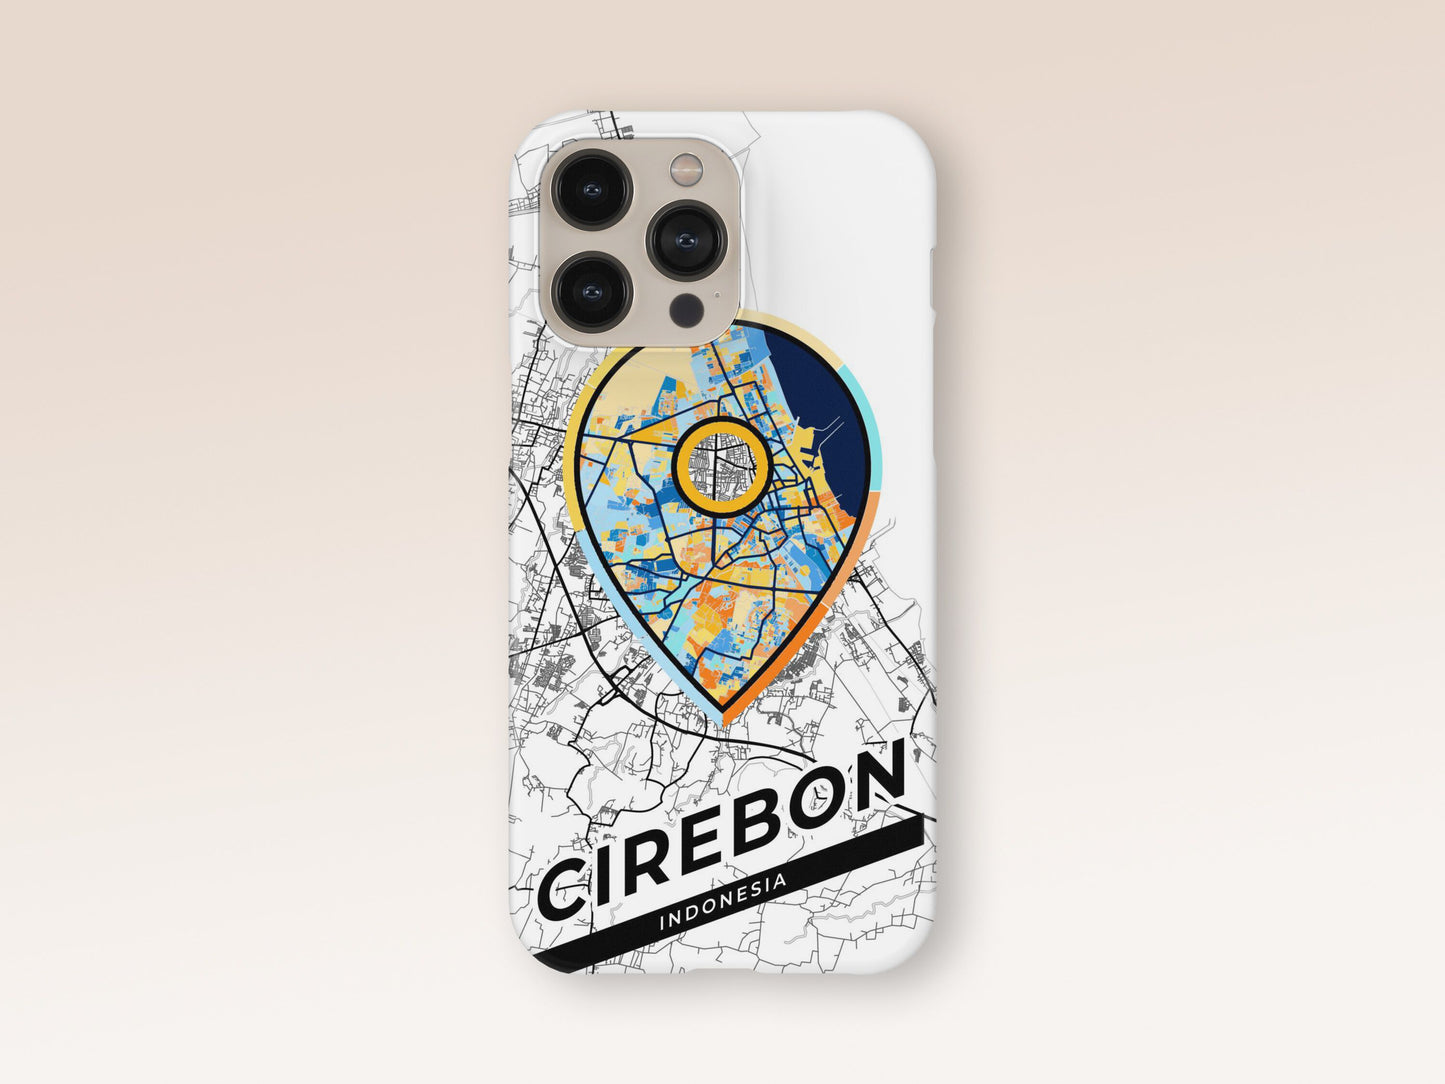 Cirebon Indonesia slim phone case with colorful icon. Birthday, wedding or housewarming gift. Couple match cases. 1